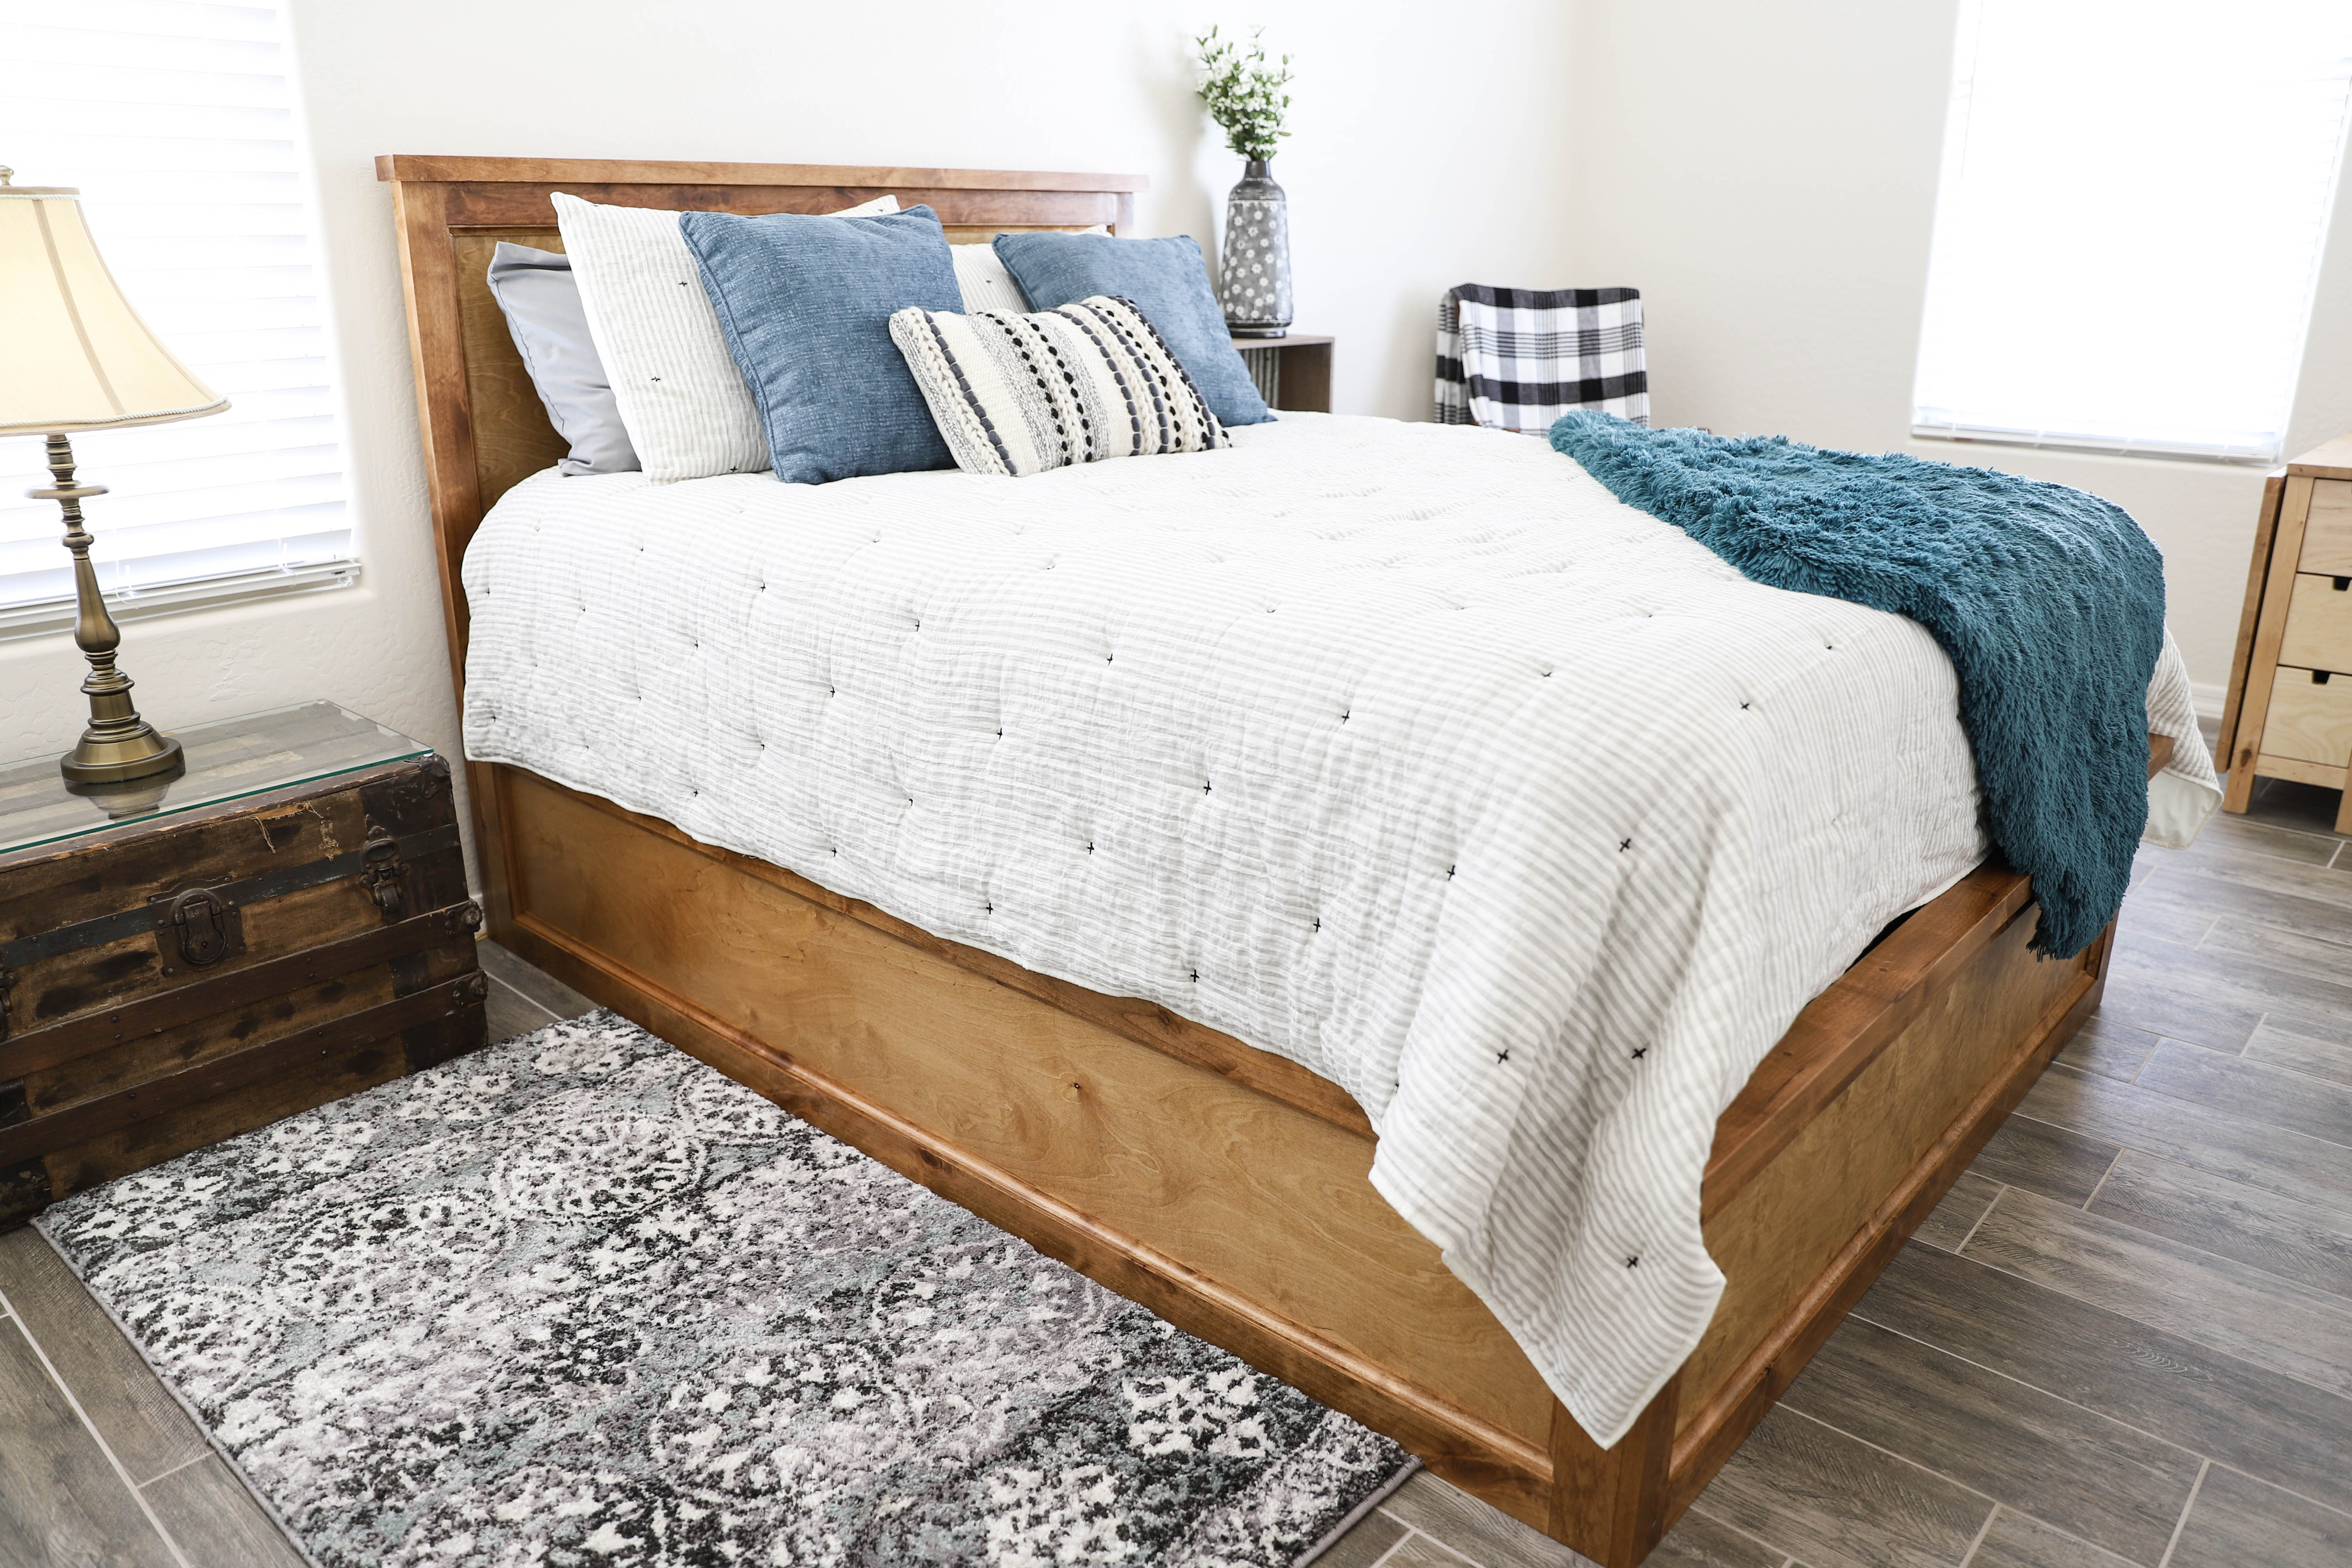 How To Build A Queen Size Storage Bed, Storage Bed Frame Queen Diy